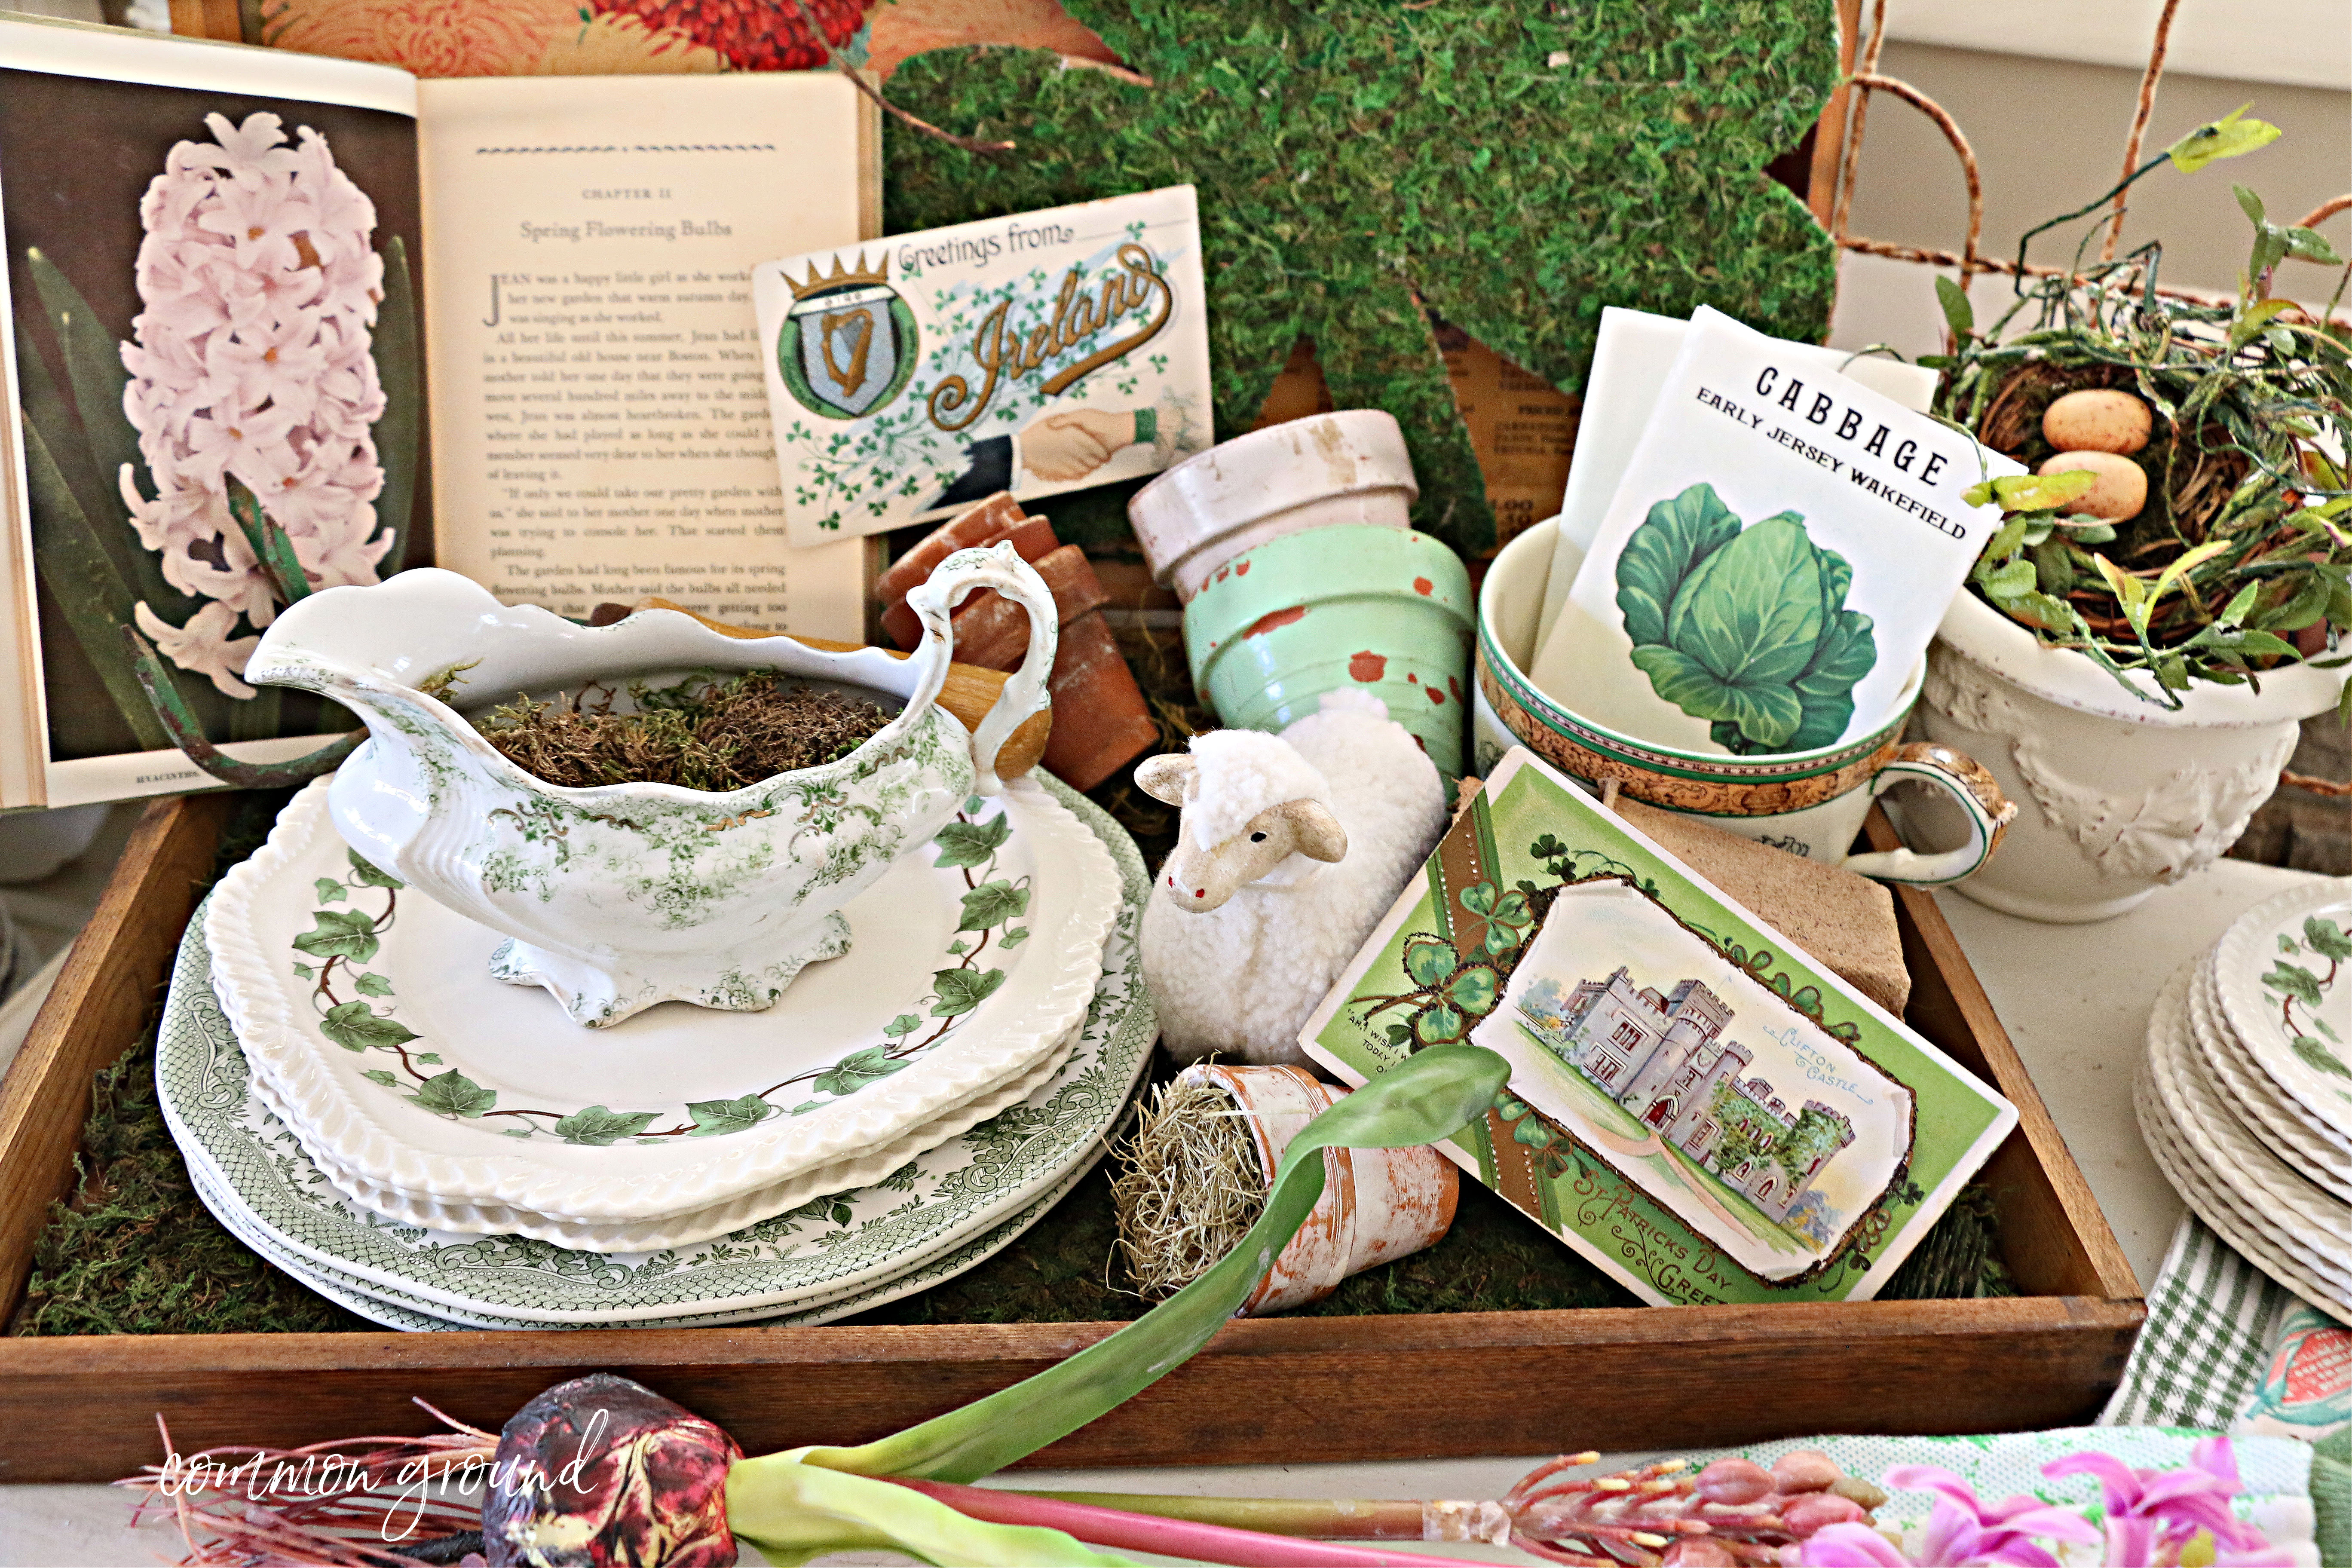 common ground : St. Patrick's Day Seed Box Vignette